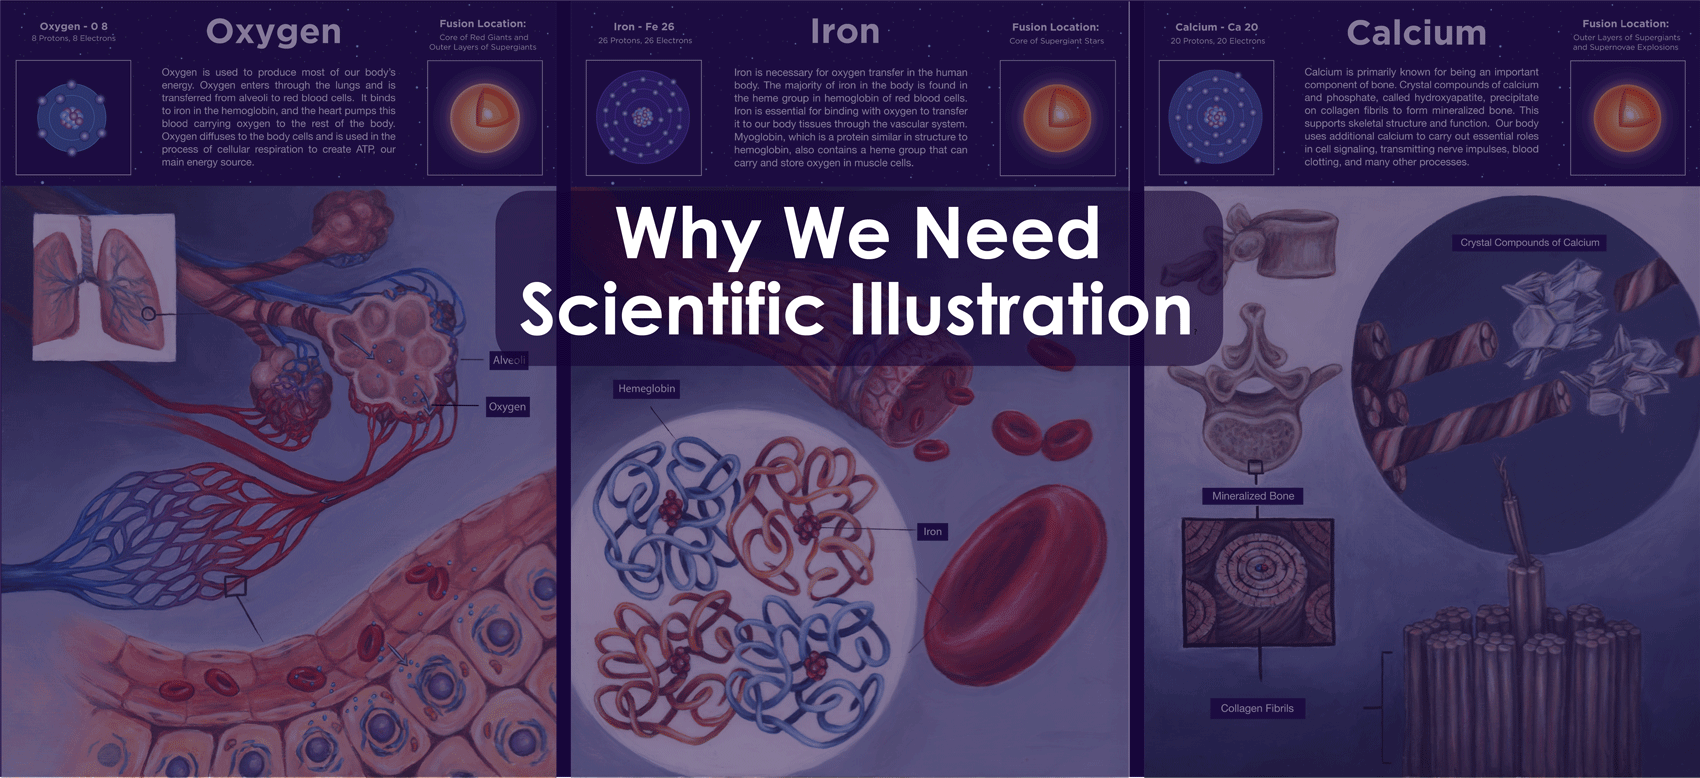 Title image reading "Why We Need Scientific Illustration" layered over illustrations of the internal human anatomy